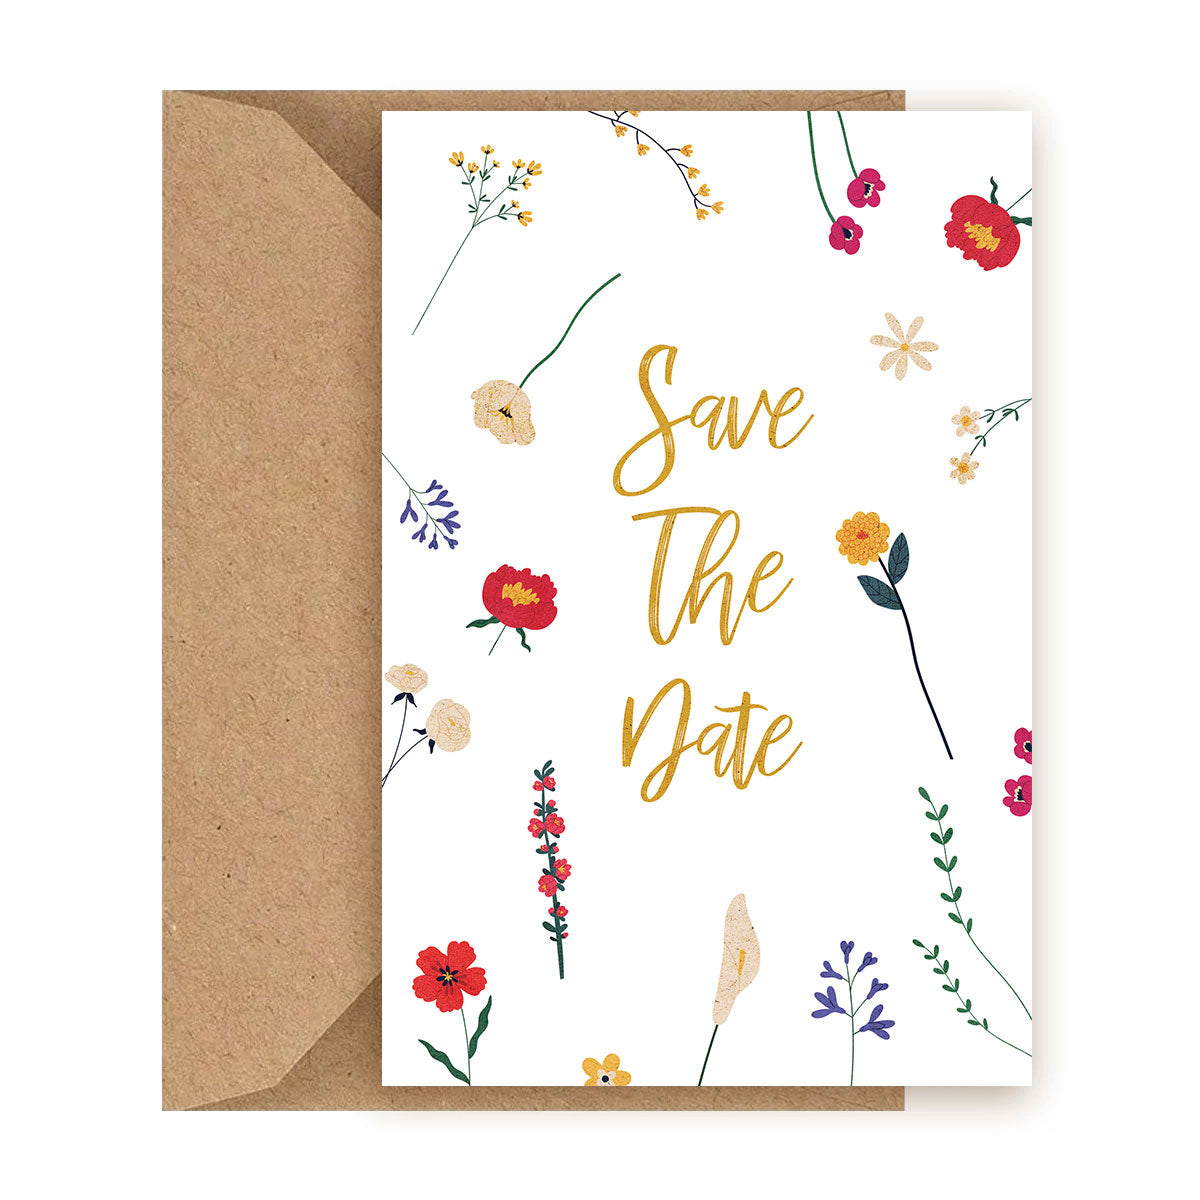 Save the Date Card for sale, Succulent Happy Birthday Card for sale, Cactus Greeting Card, Succulents Greeting Card, Succulents Gift Ideas